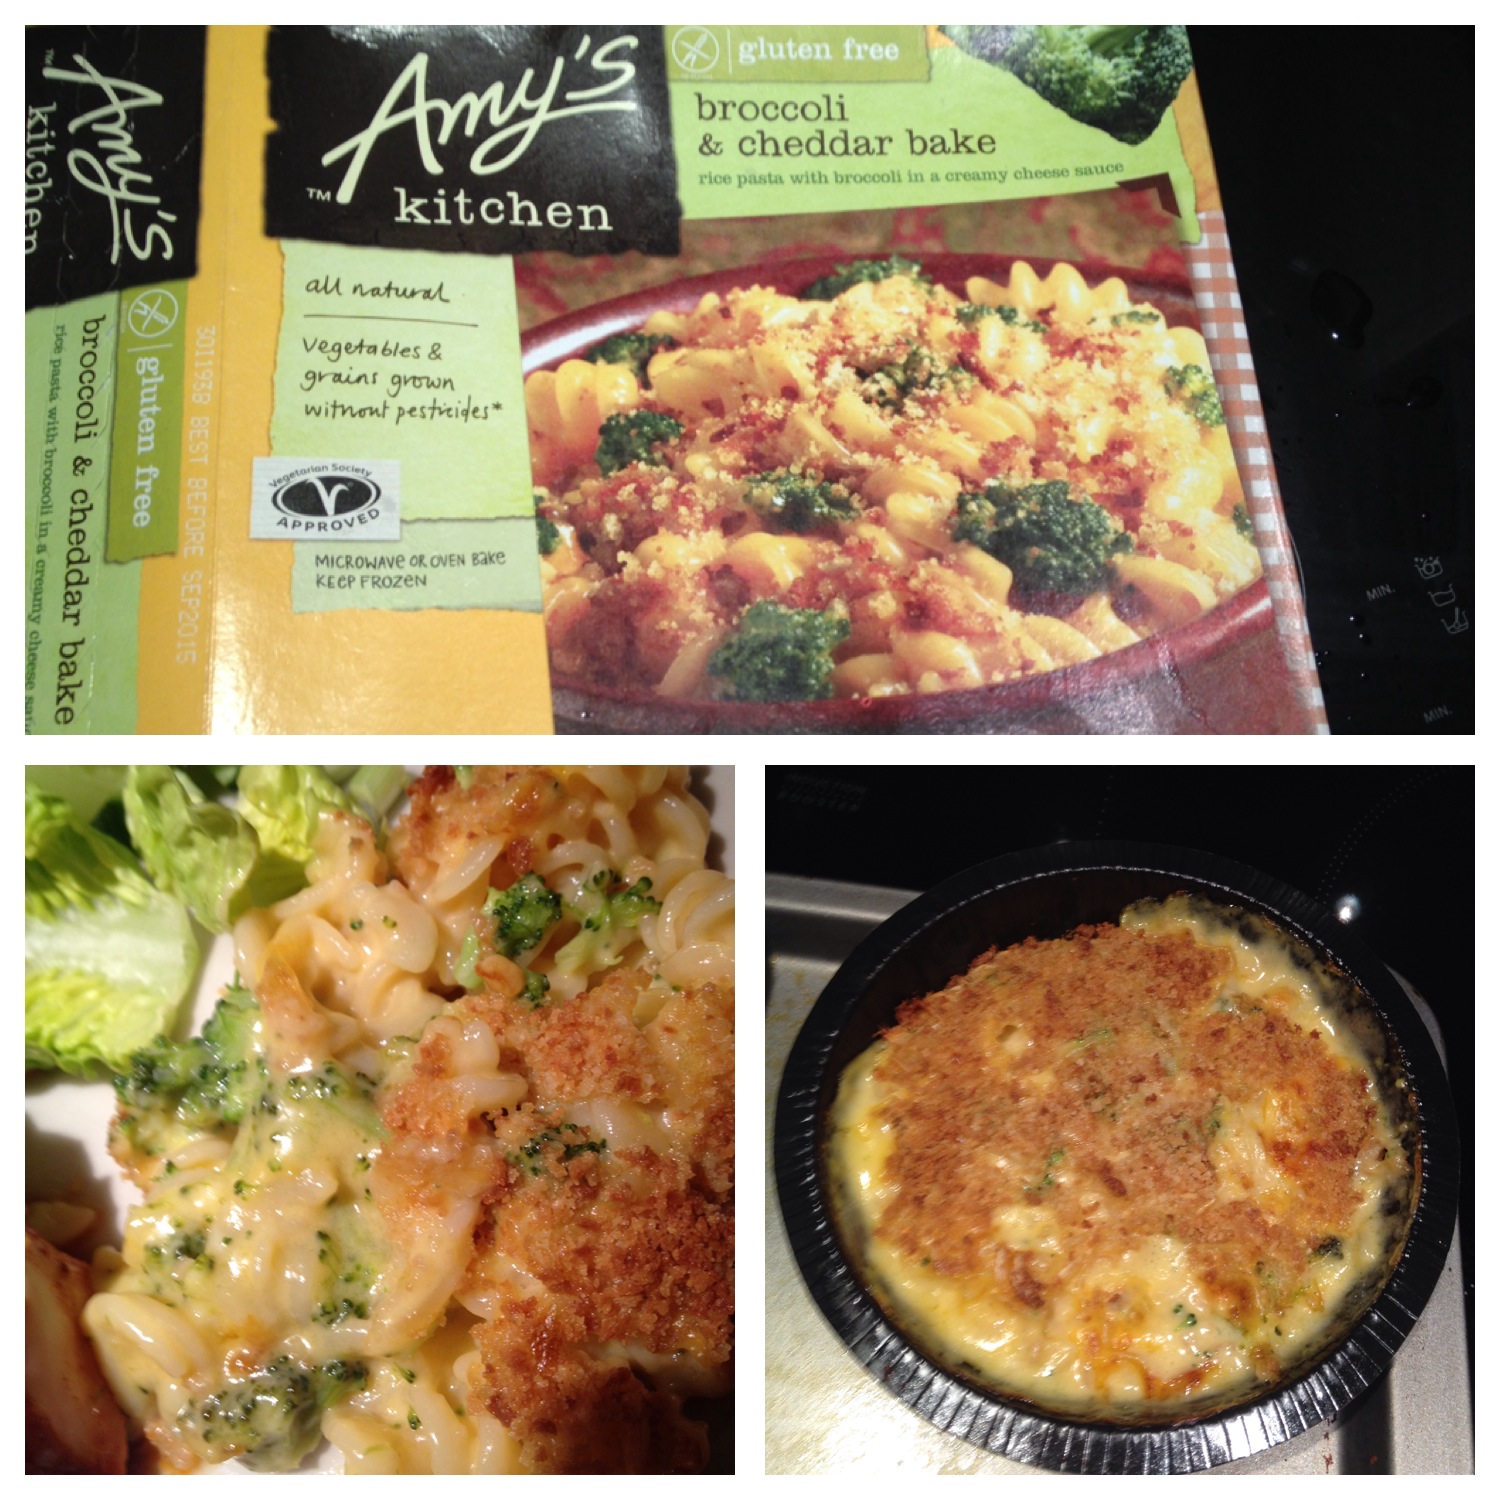 Product Review Broccoli Cheddar Bake By Amys Kitchen